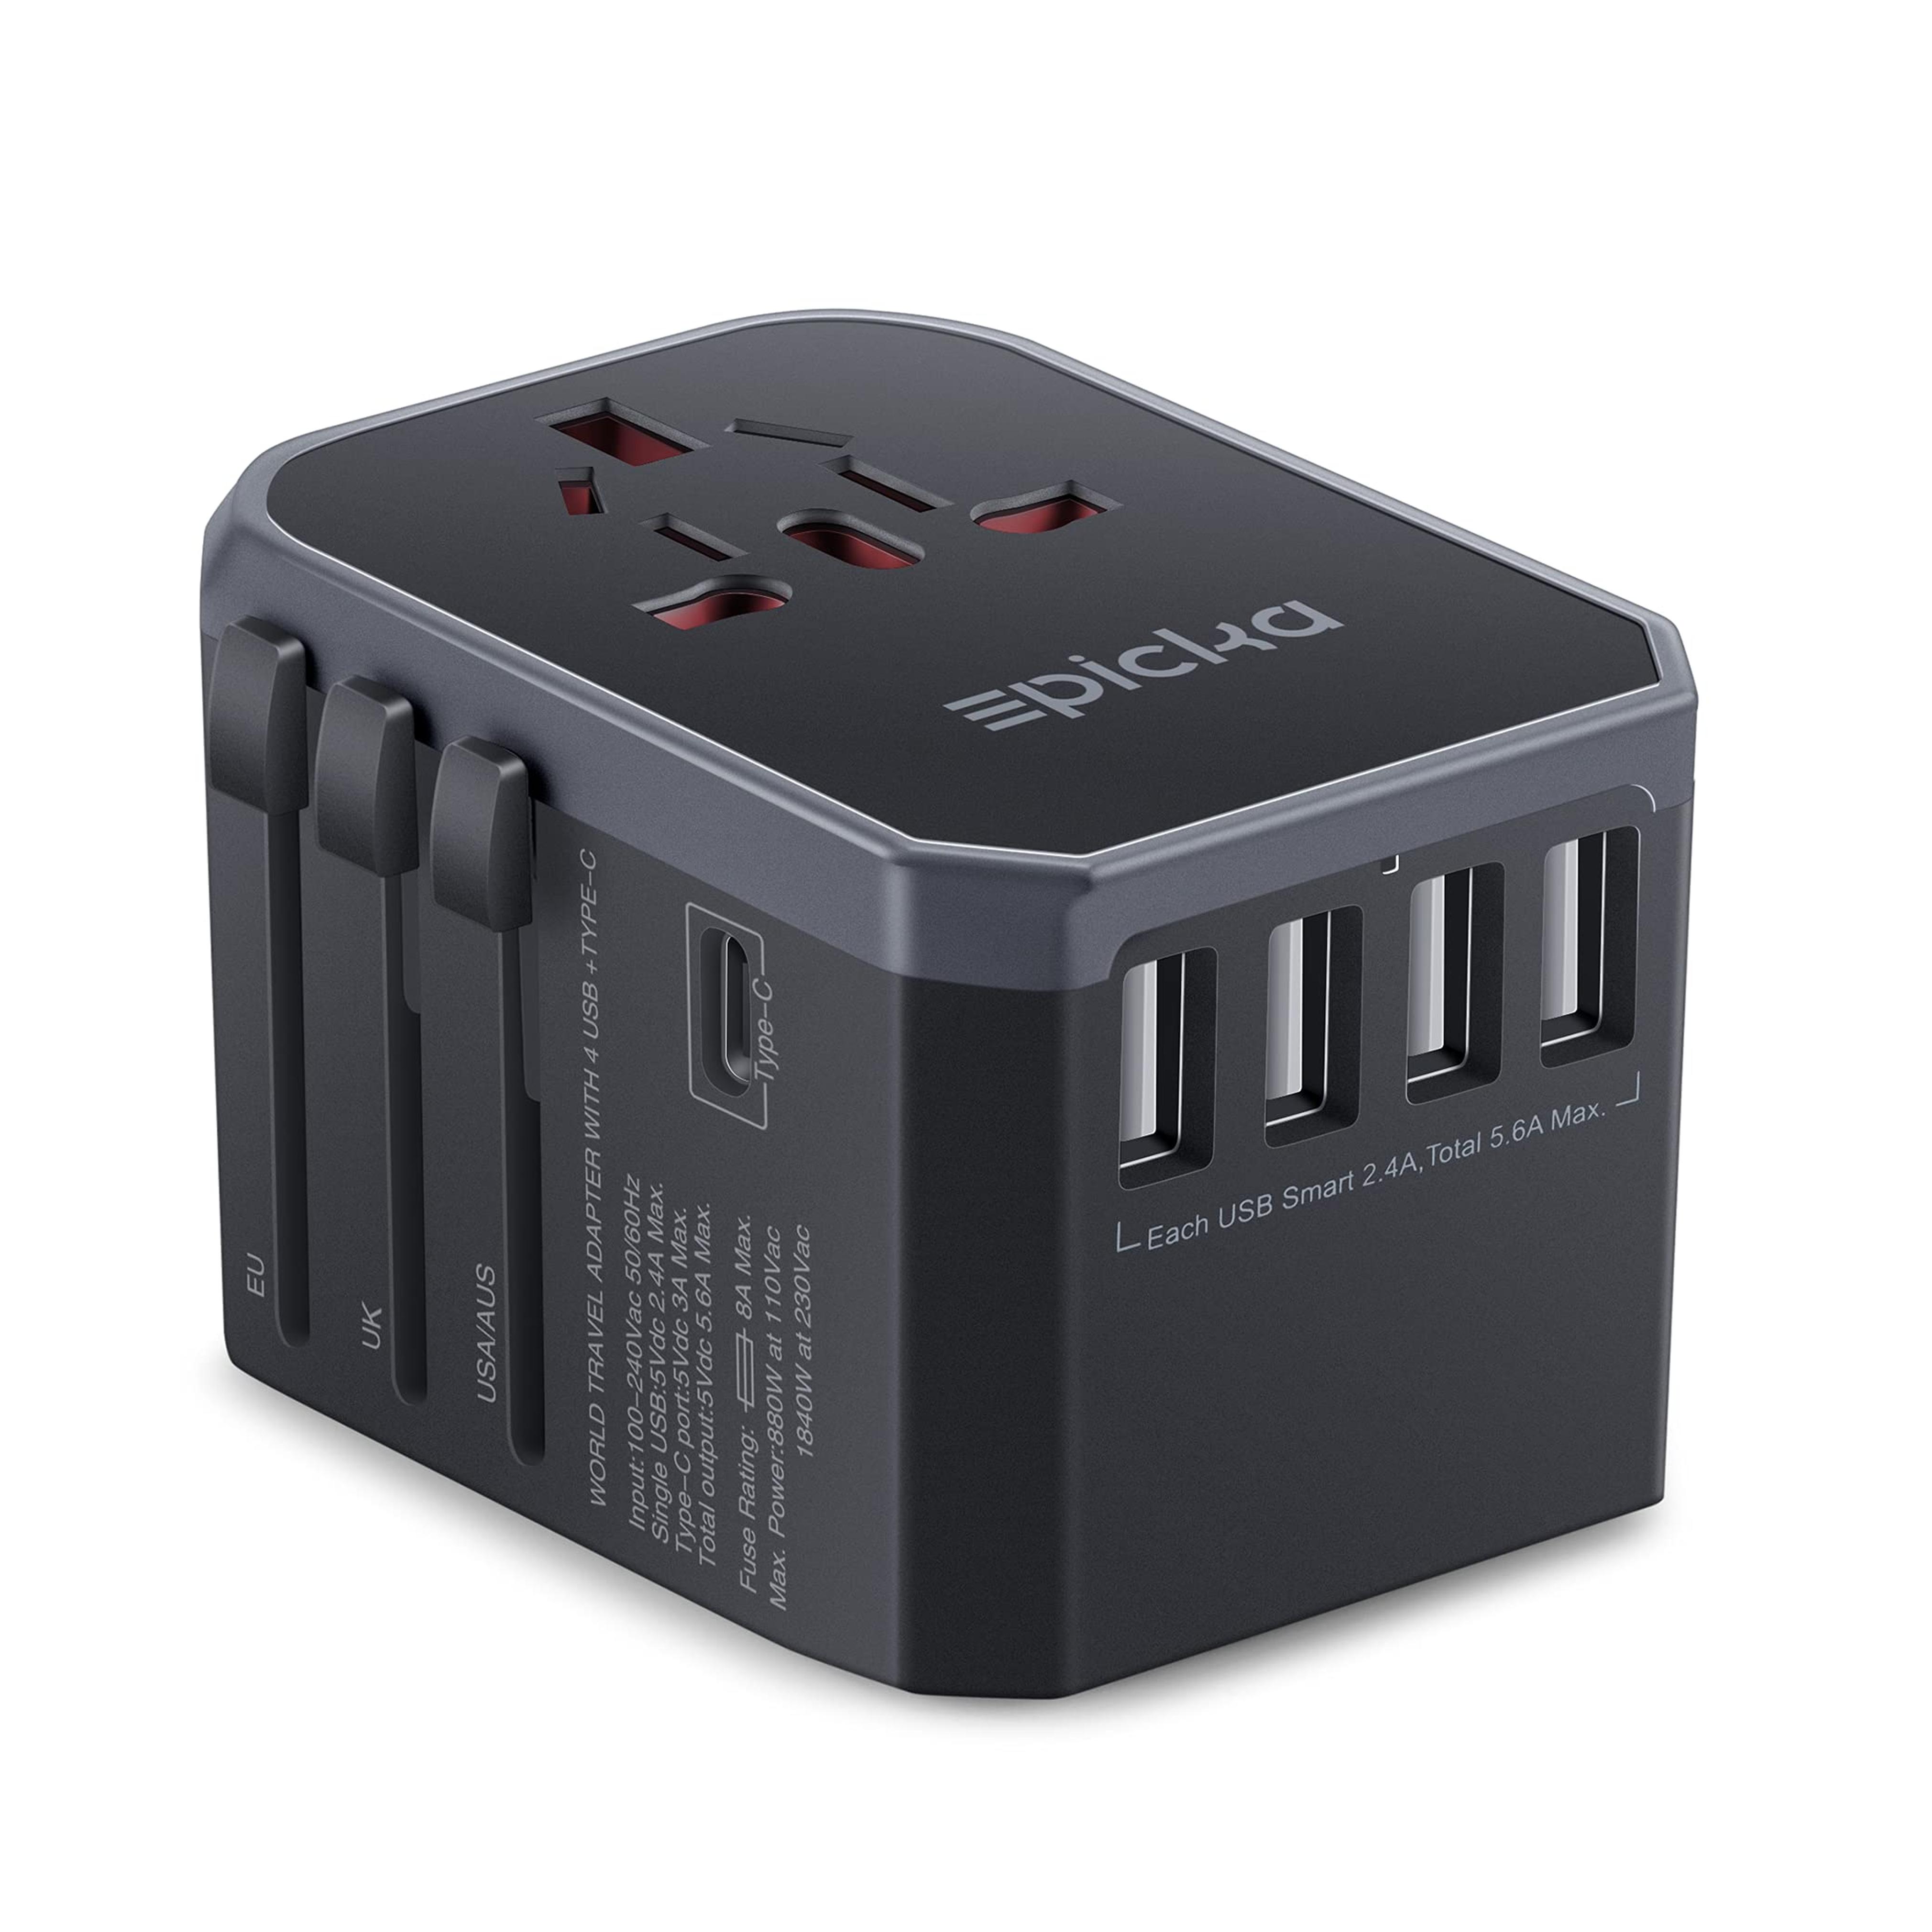 EPICKA Universal Travel Adapter One International Wall Charger AC Plug Adaptor with 5.6A Smart Power and 3.0A USB Type-C for USA EU UK AUS ( Grey ) - - Amazon.com